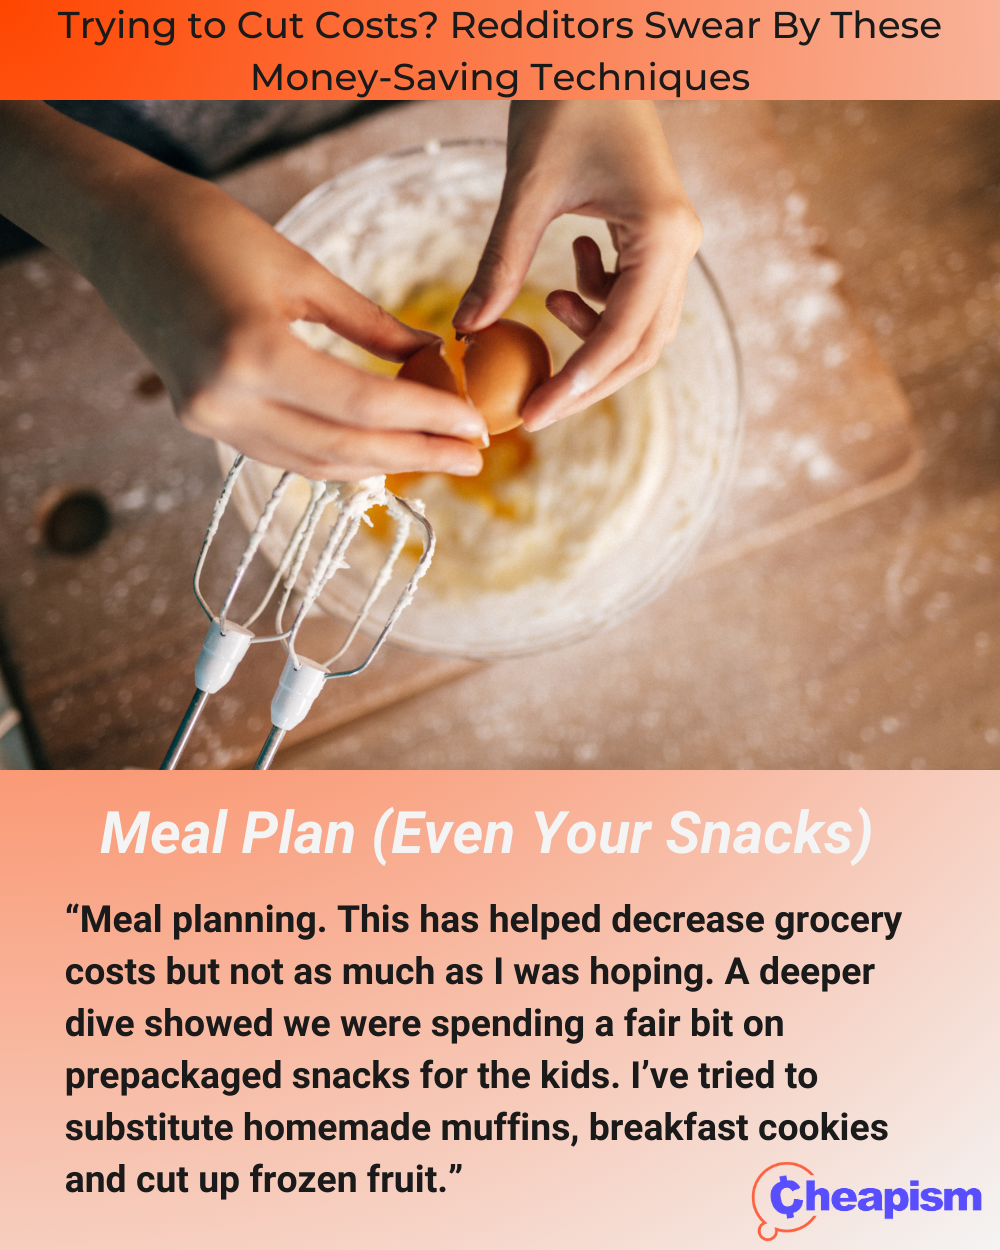 Get Smart About Meal Planning